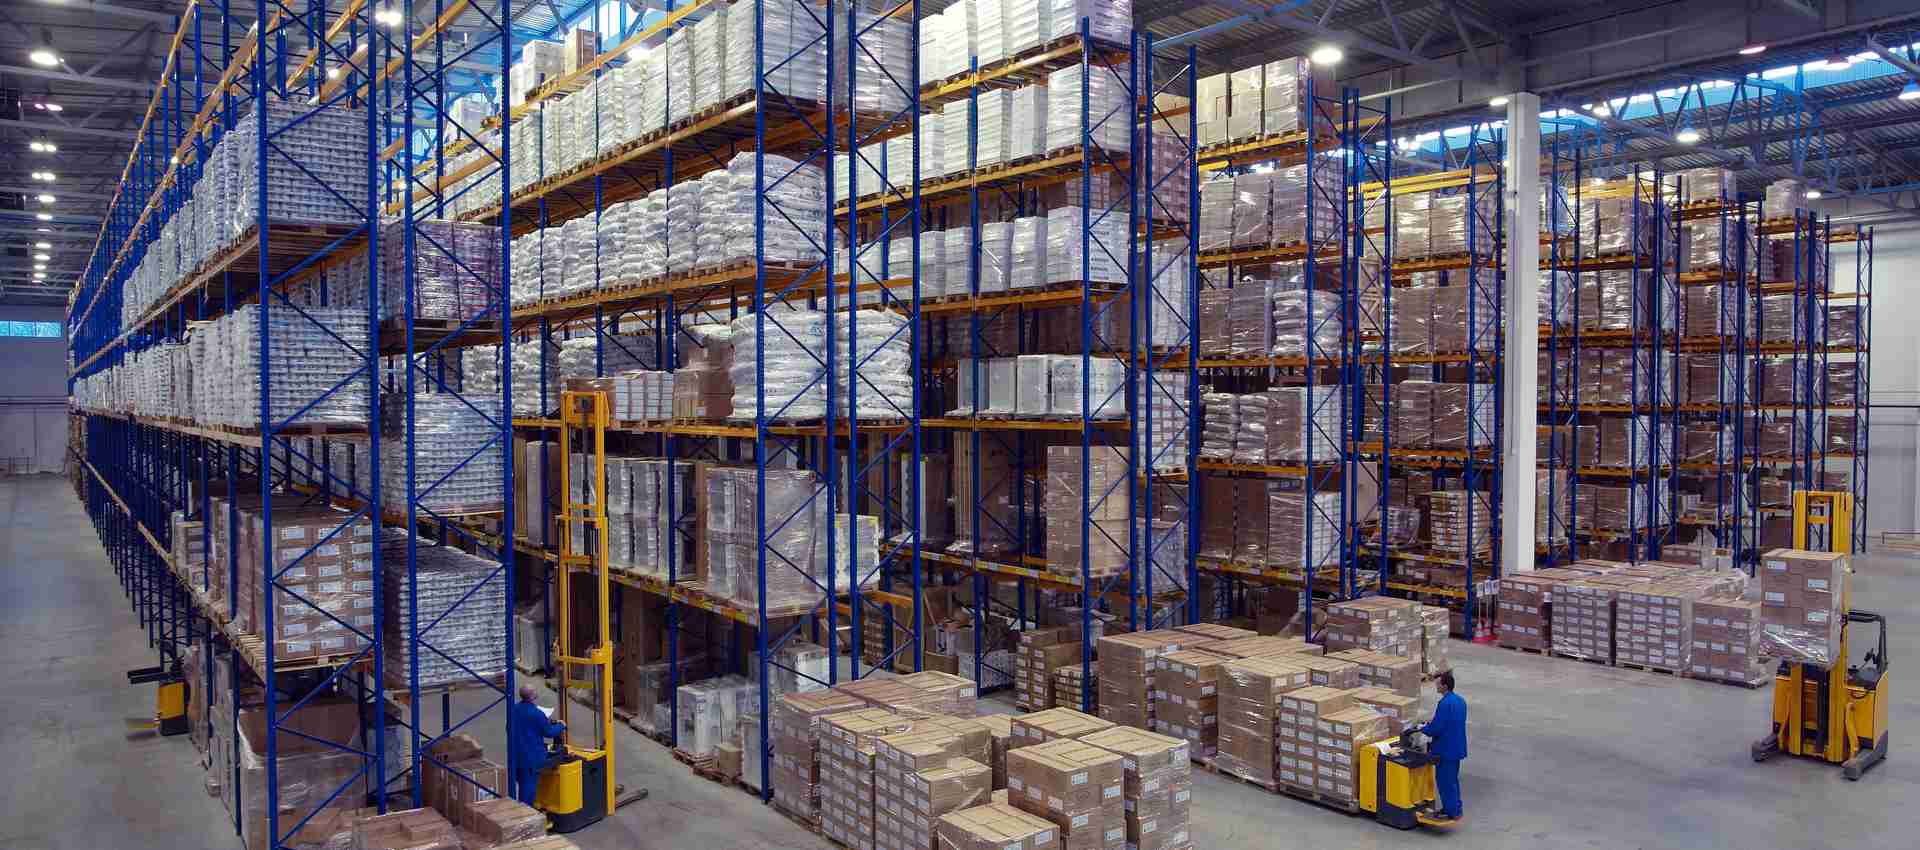 6 Ways To Optimize Your Warehouse Labor